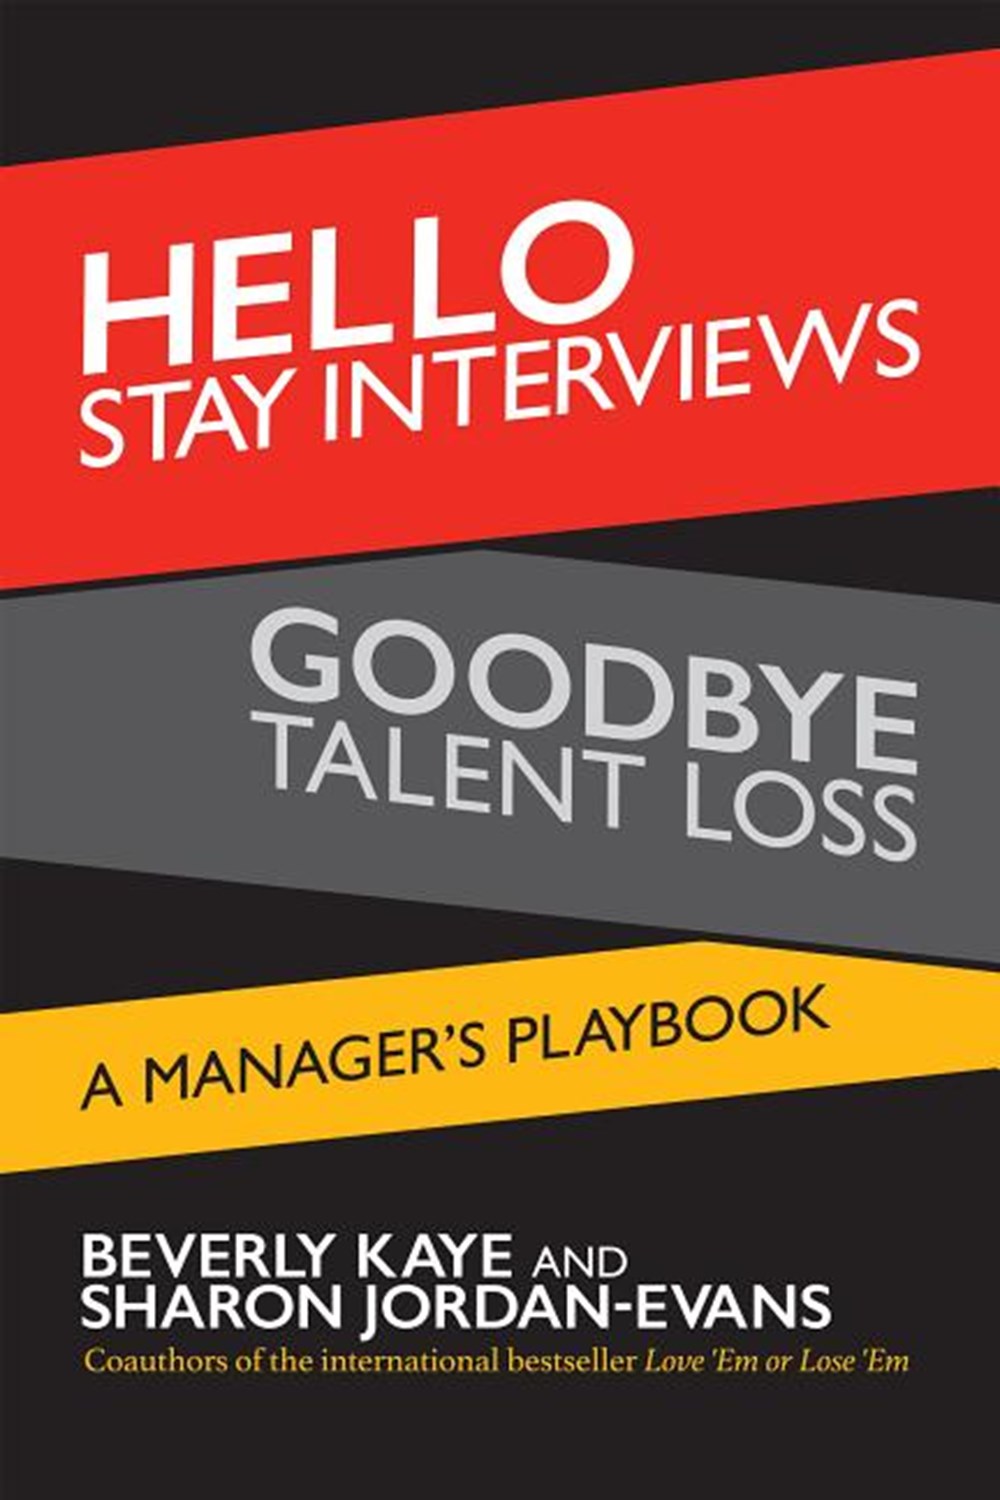 Hello Stay Interviews, Goodbye Talent Loss A Manager's Playbook